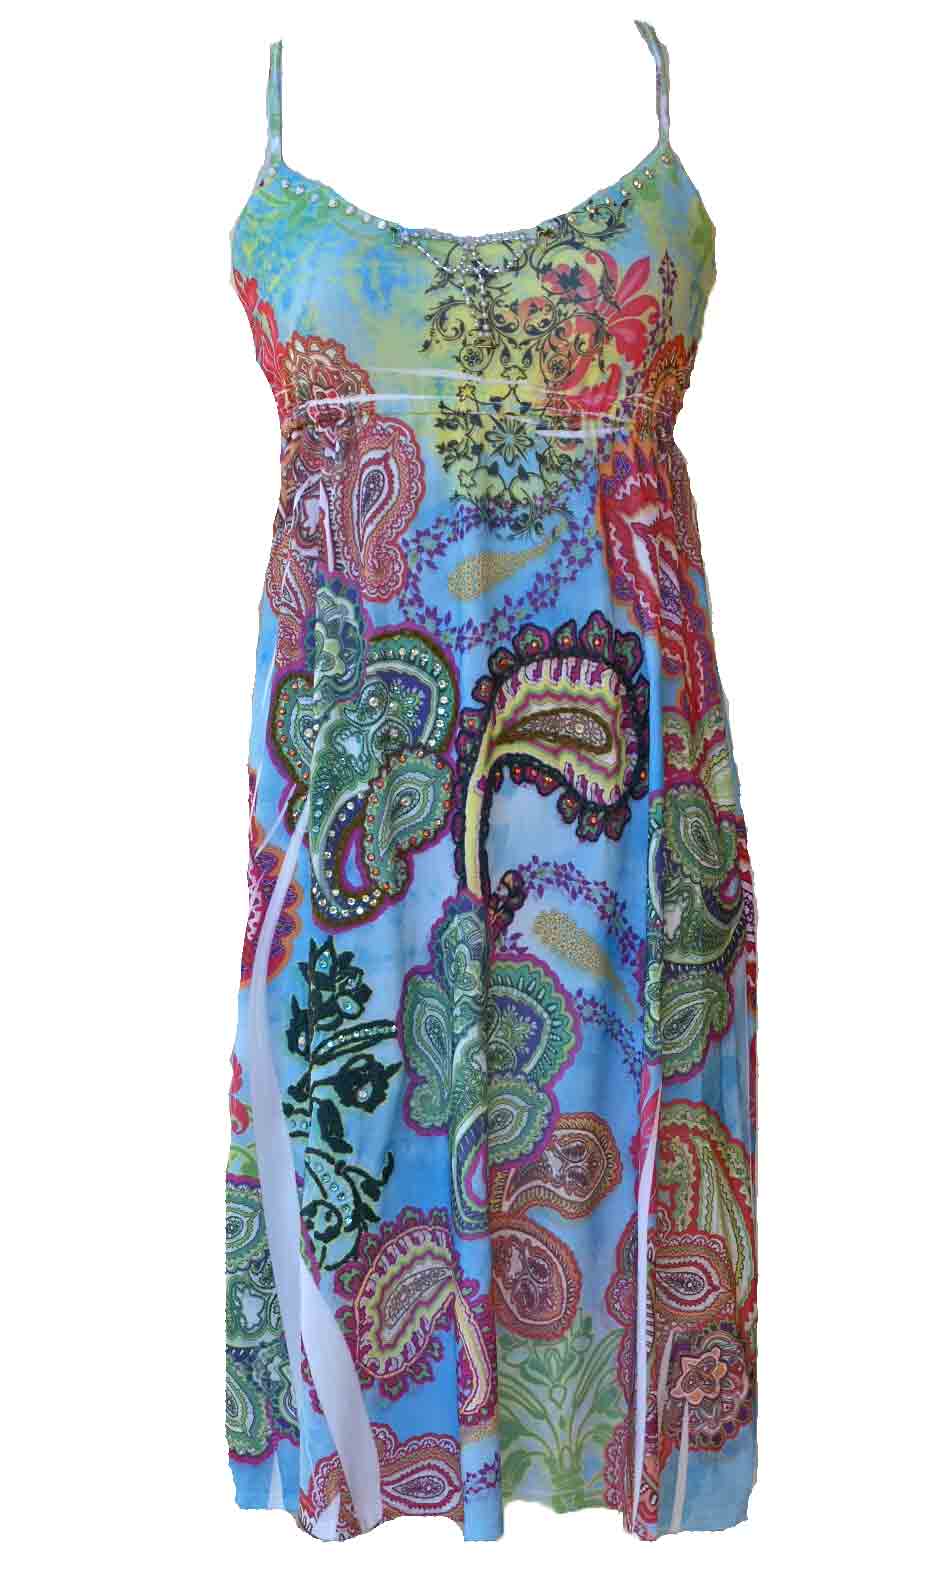 Fun, Sexy Tank Dress With Embroidery and Crystals [Spy Brand Clothing ...